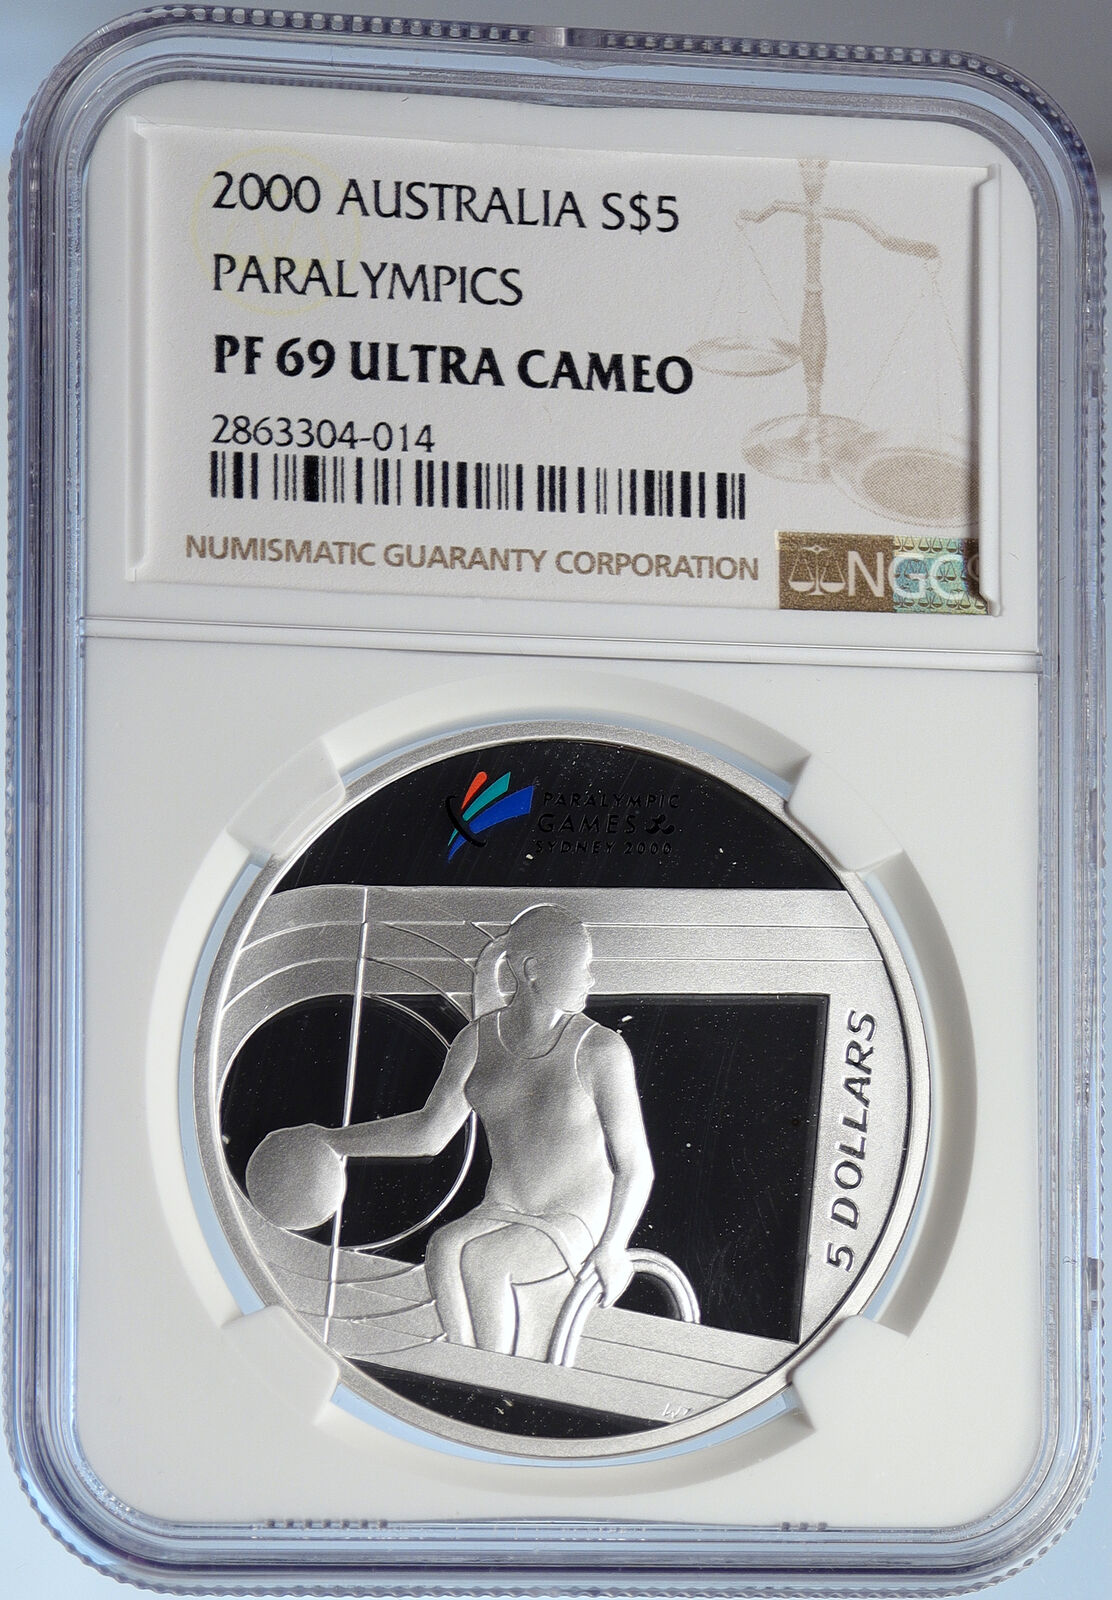 2000 AUSTRALIA Paralympics Olympic Games Proof Silver 5 Dollar Coin NGC i105850